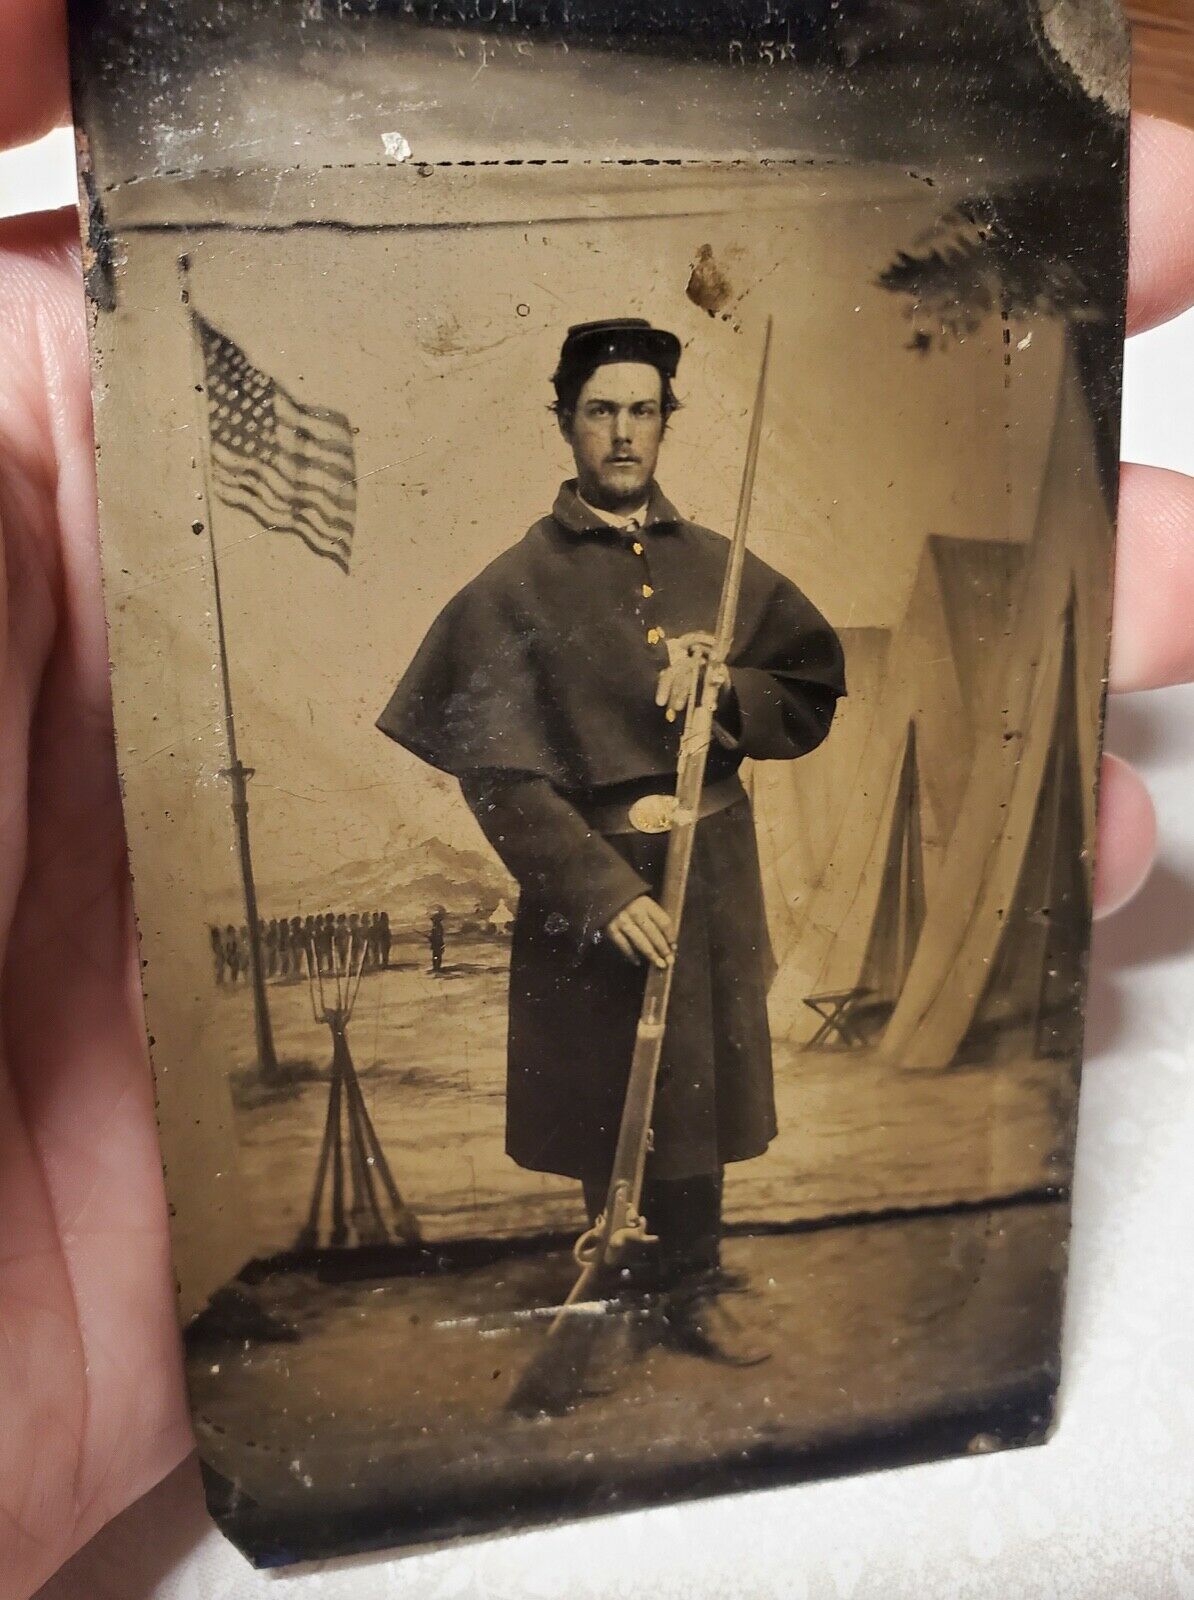 Union army soldier